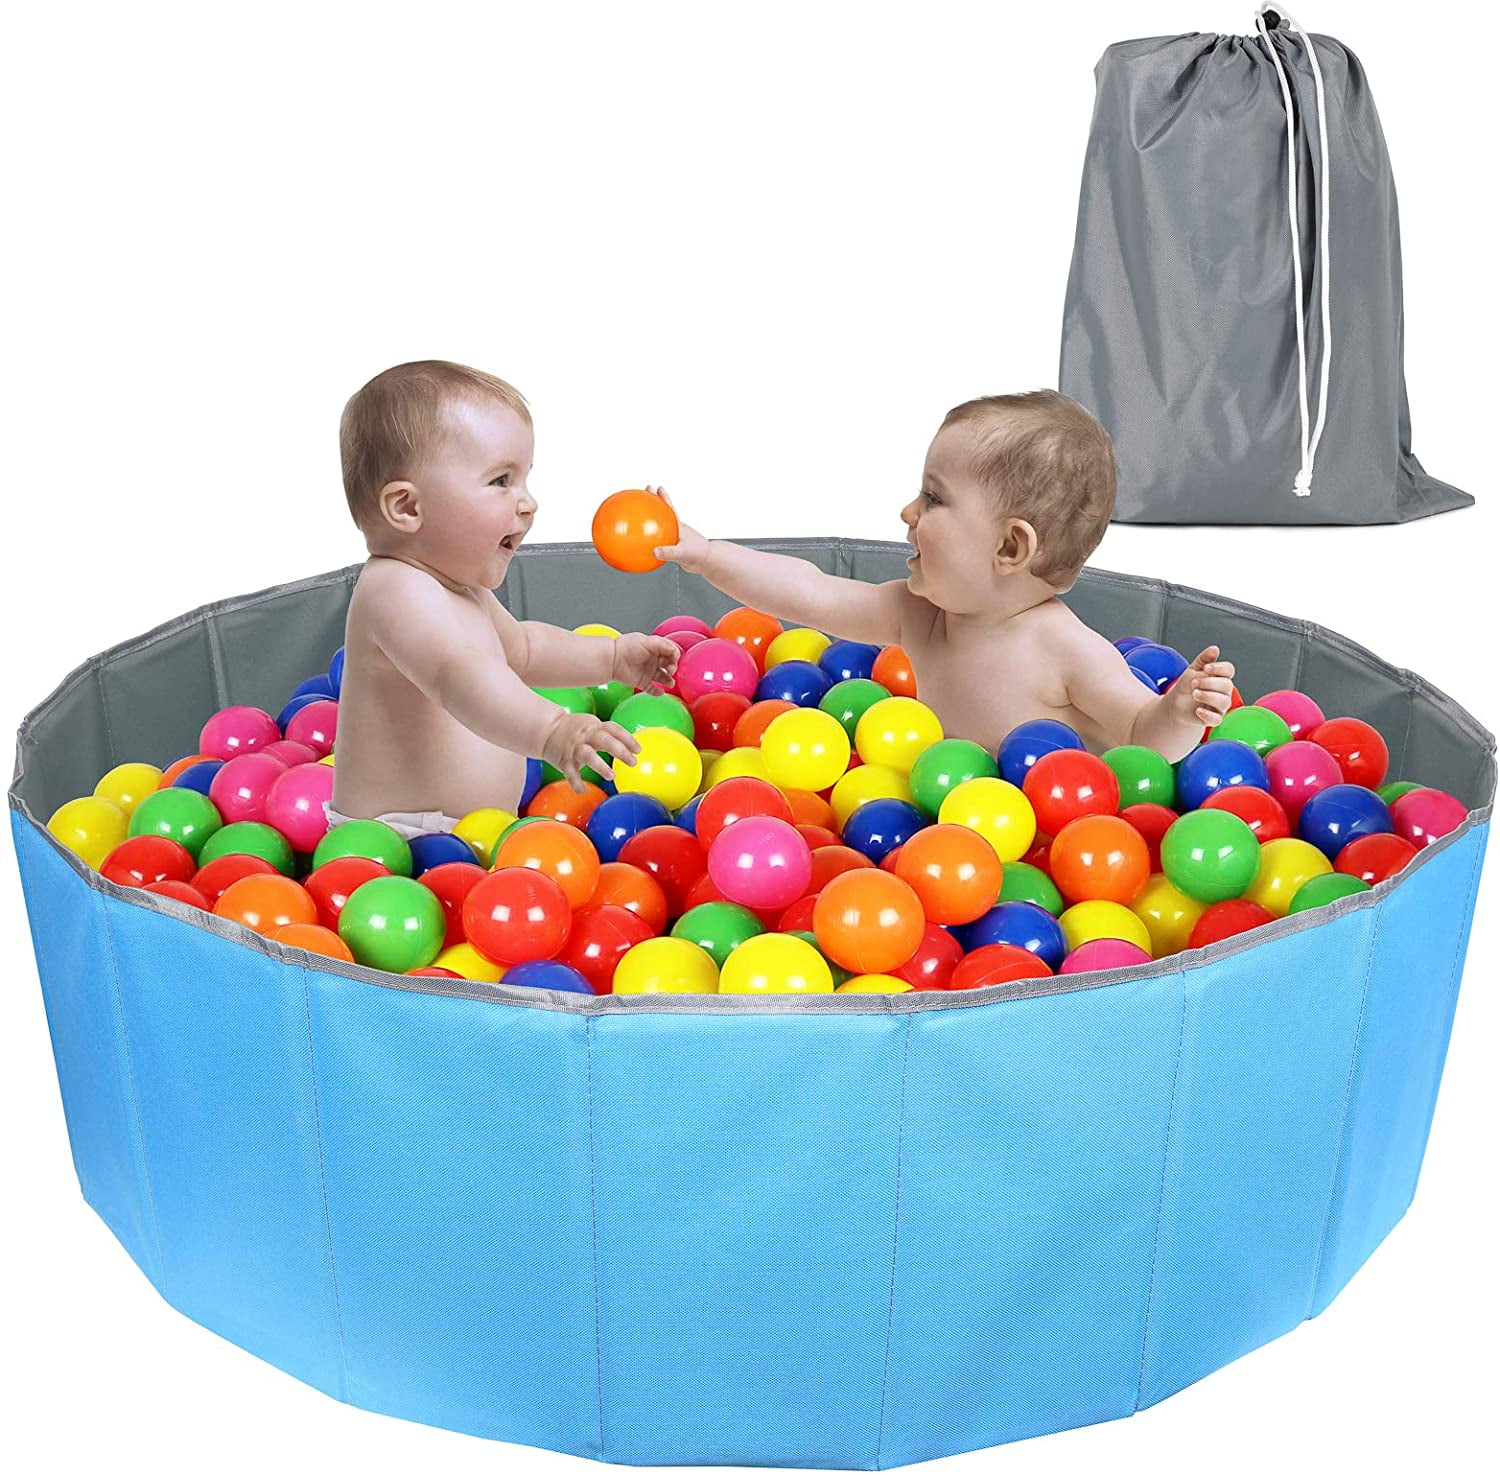  Click N' Play Ball Pit Balls for Kids, 200 Pack - Plastic  Refill Balls, Phthalate & BPA Free, Reusable Storage Bag with Zipper, Gift  for Toddlers and Kids for Ball Pit